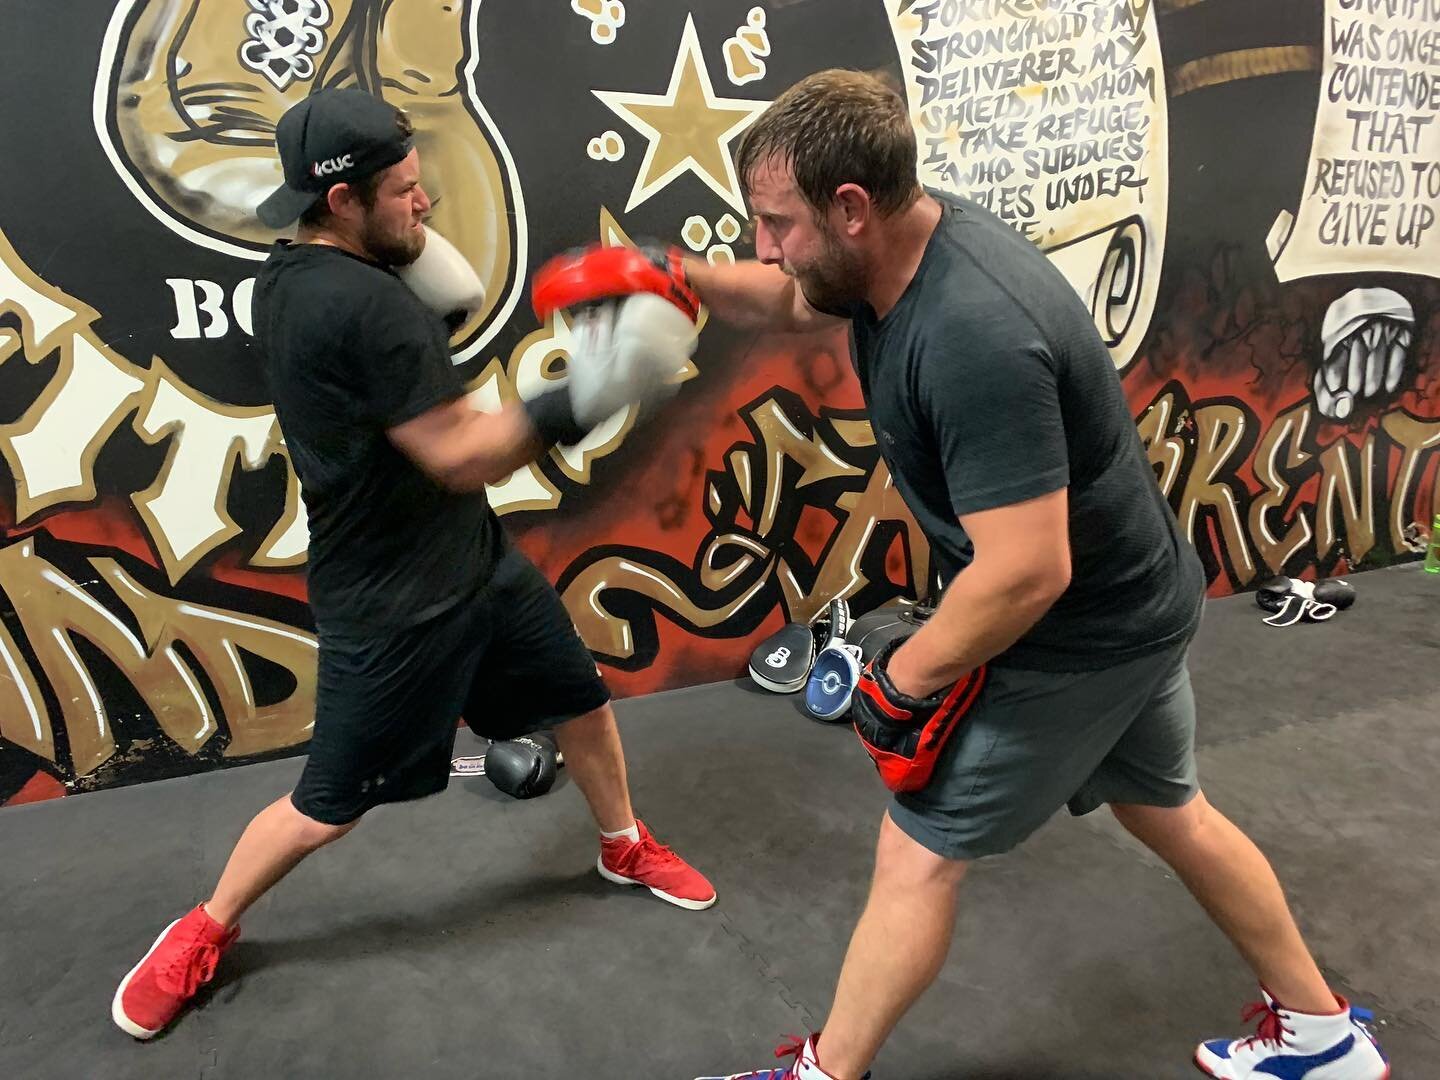 It&rsquo;s been awhile since we&rsquo;ve been allowed to hit hand pads with each other in class. 
Doesn&rsquo;t look like these guys skipped a beat. Just right back at it. 💪💥🥊

#boxing #handpads #boxingtraining #boxer #boxingdrills #boxinglife #cl